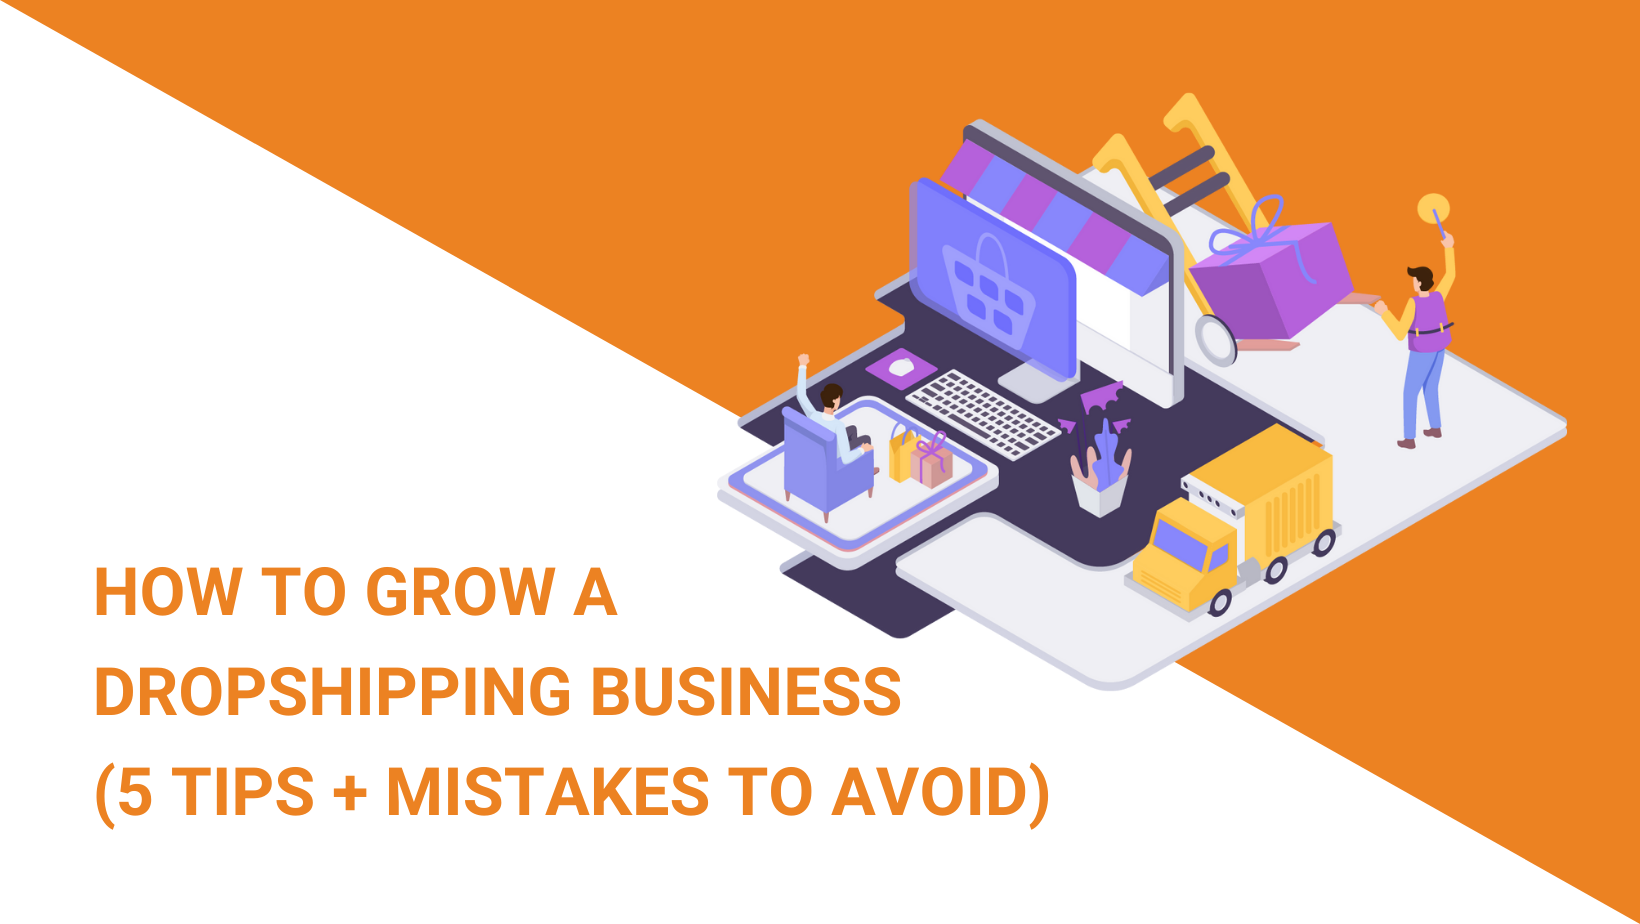 HOW TO GROW A DROPSHIPPING BUSINESS (5 TIPS + MISTAKES TO AVOID)